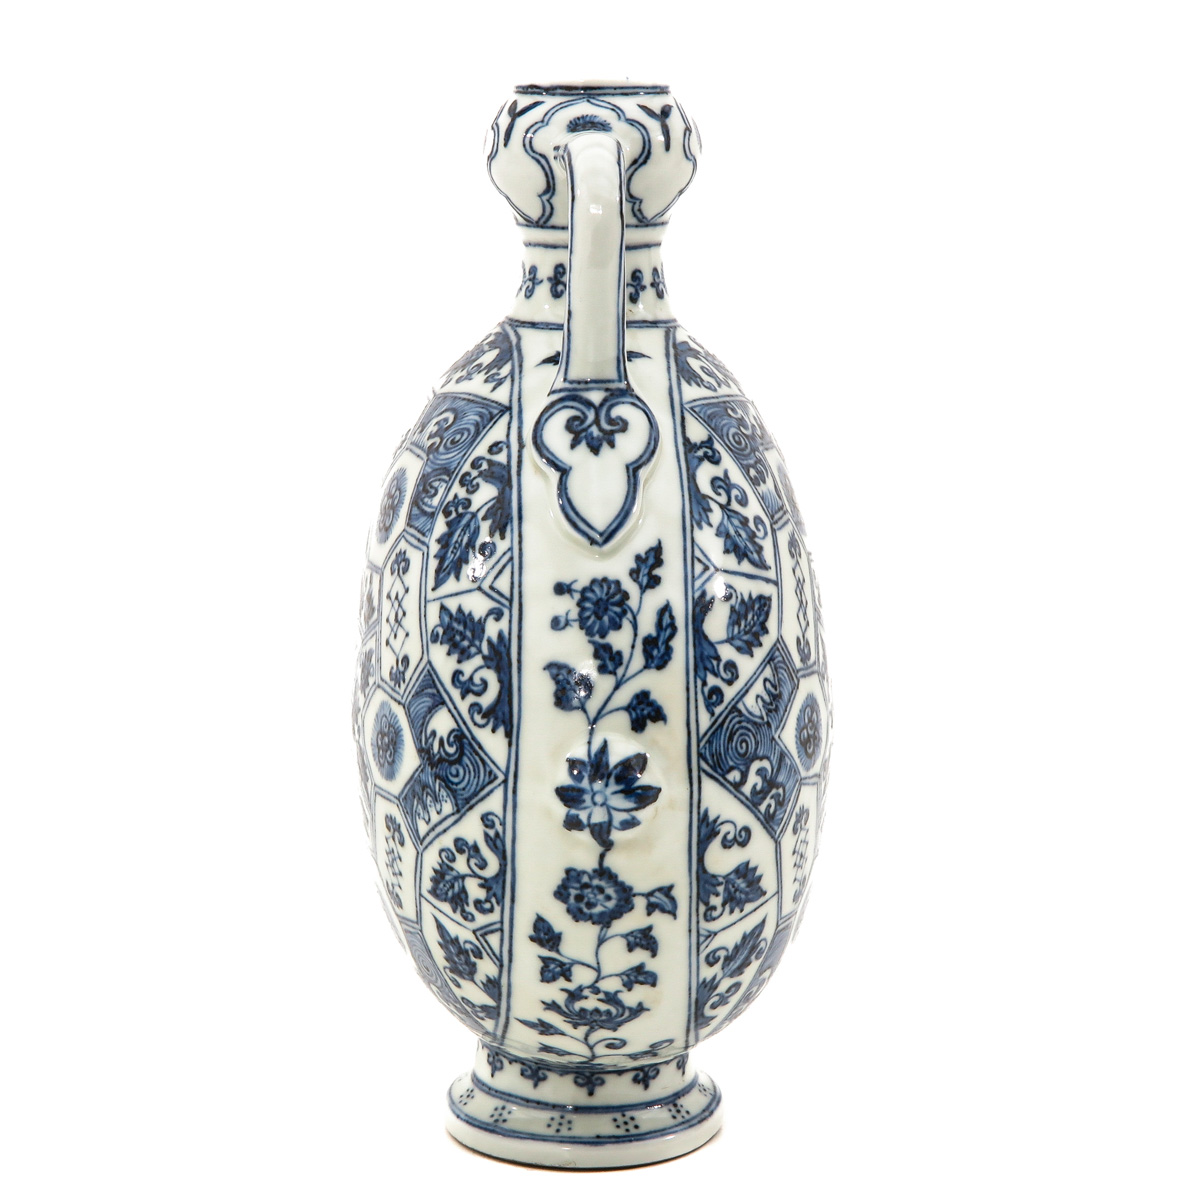 A Blue and White Moon Bottle Vase - Image 4 of 9